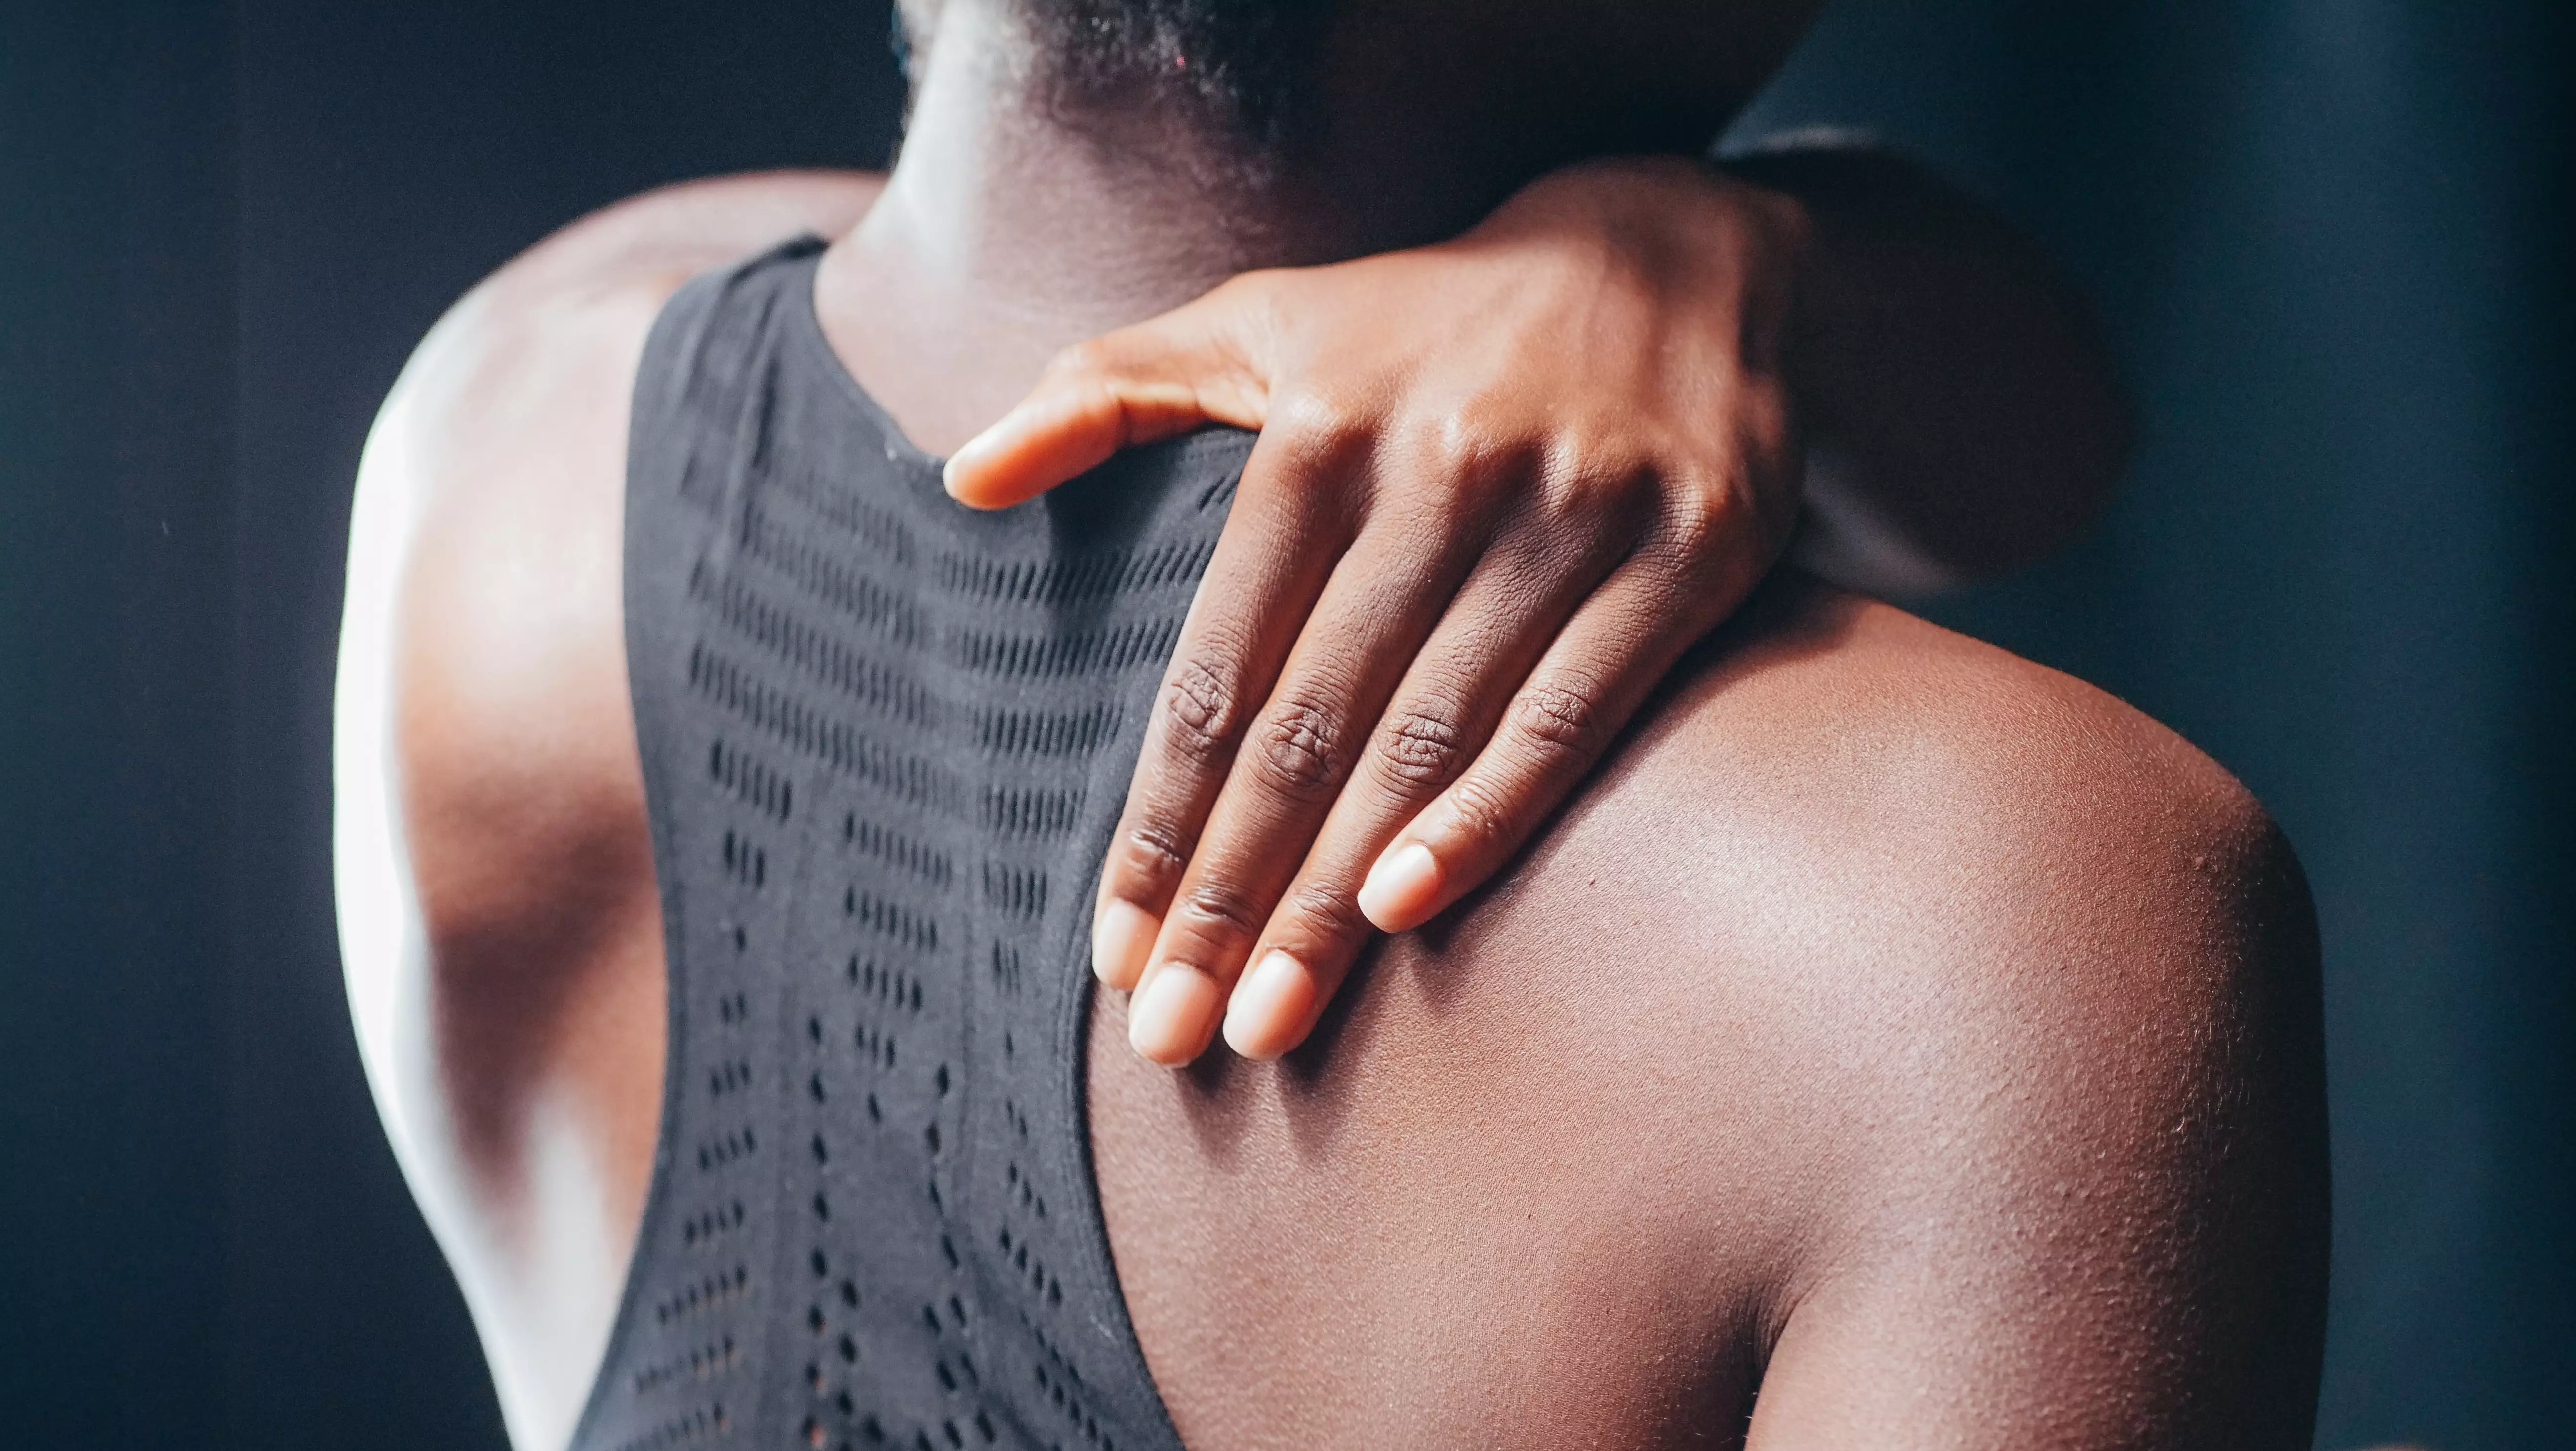 Woman holding her shoulder in pain